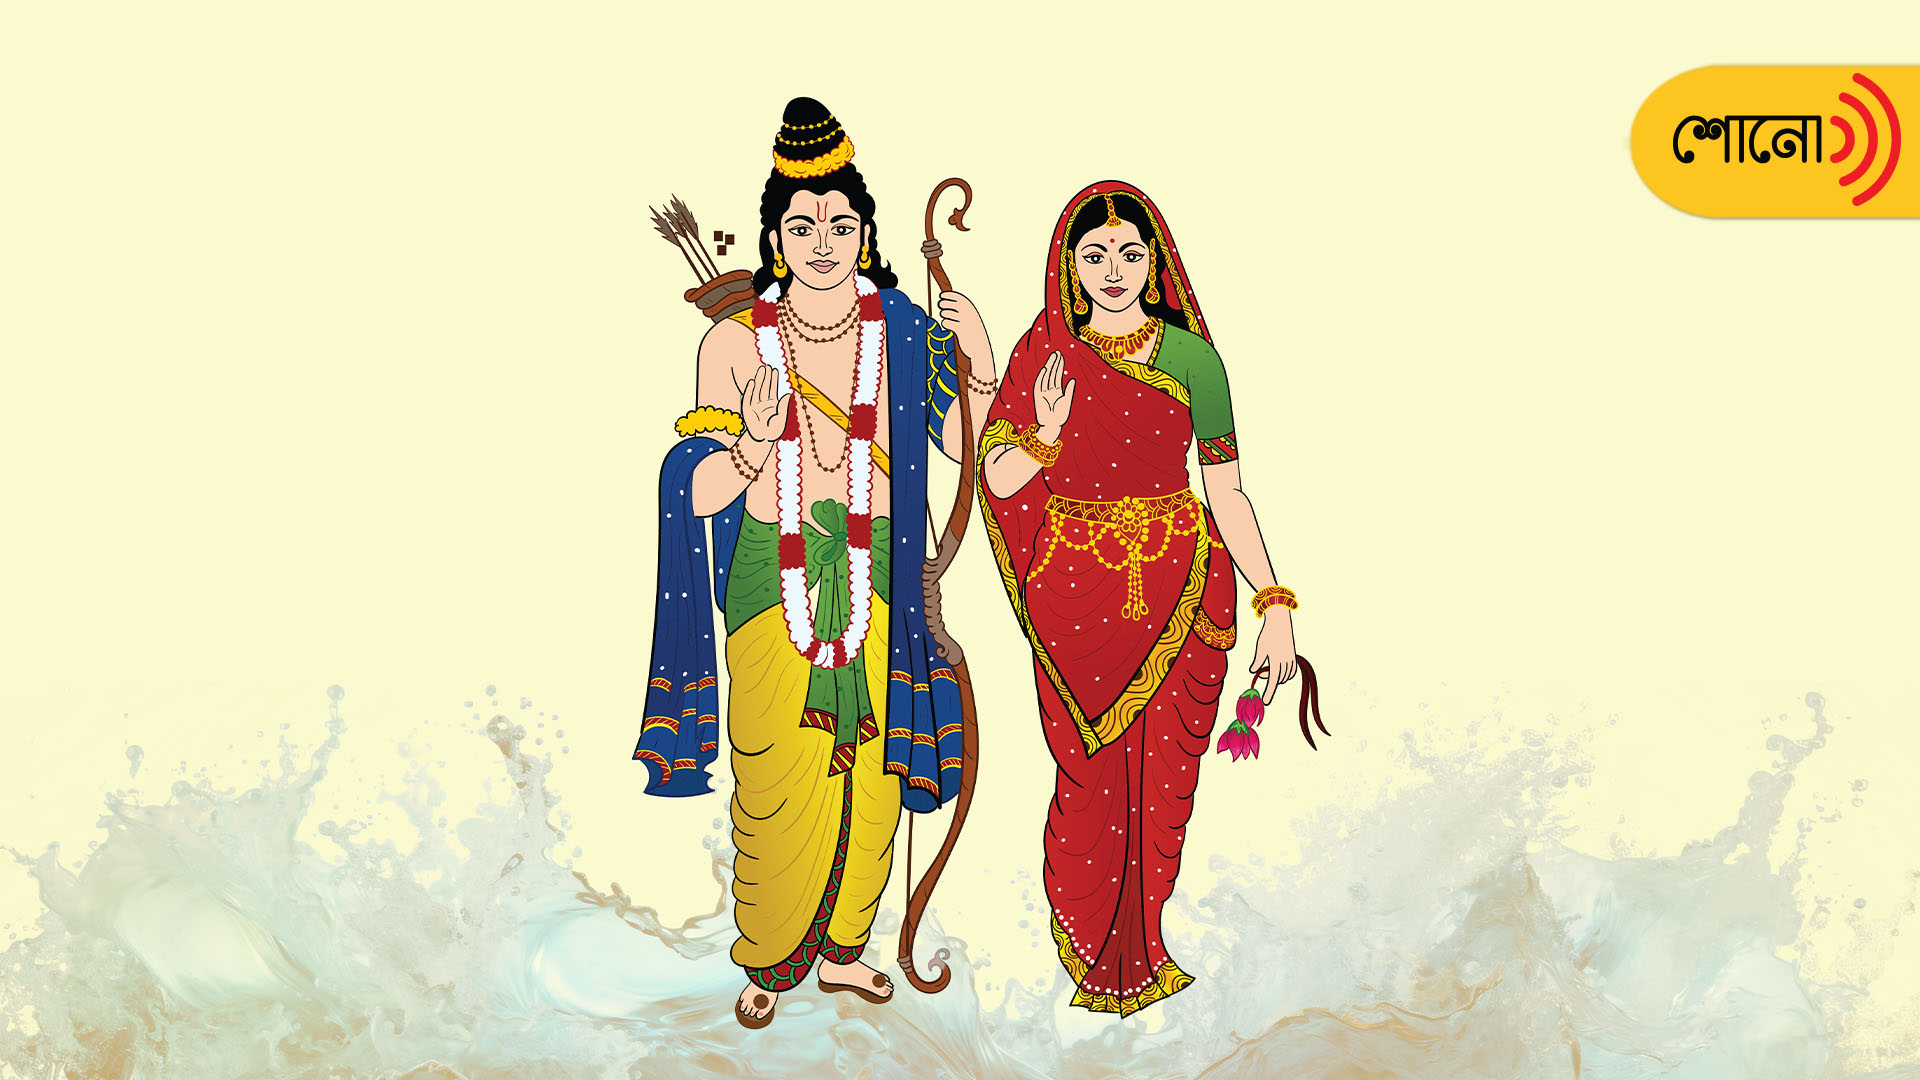 Sita promised to worship Ganga with meat and drinks for the well-being of Ram in Valmiki Ramayana